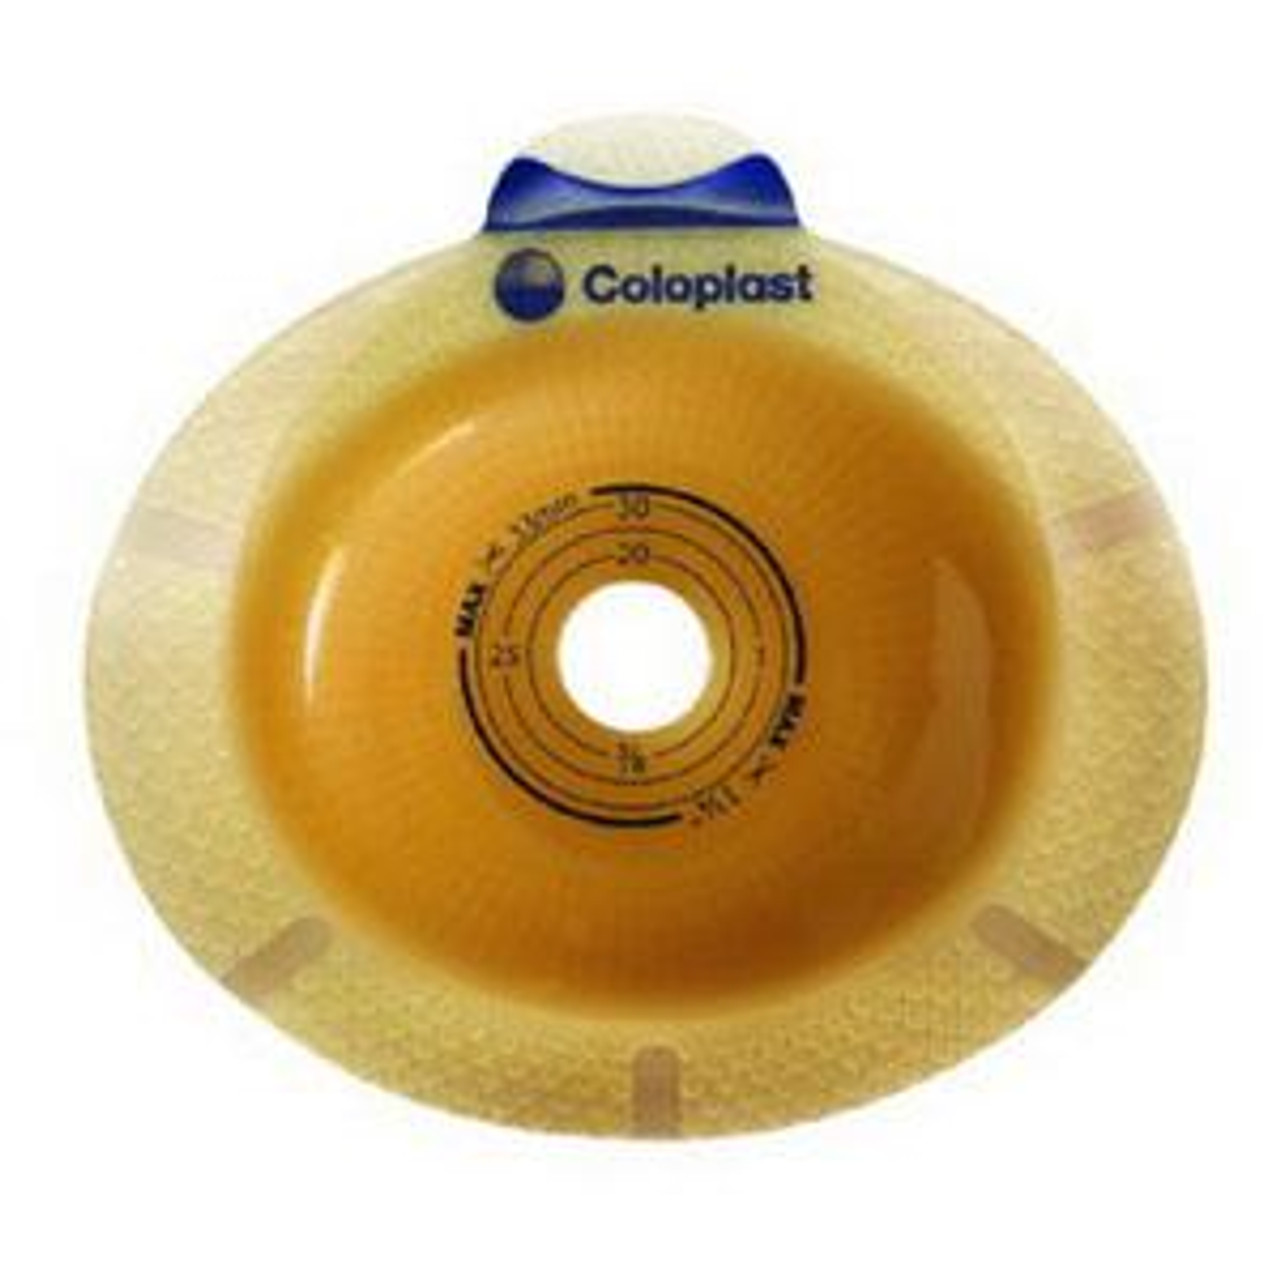 Coloplast 11011 Sensura Click Convex Light Skin Barrier, Flange Size 1 9/16in (40mm) Cut-to-fit Up To 7/8in (23mm) 5 EA Ostomy Supplies